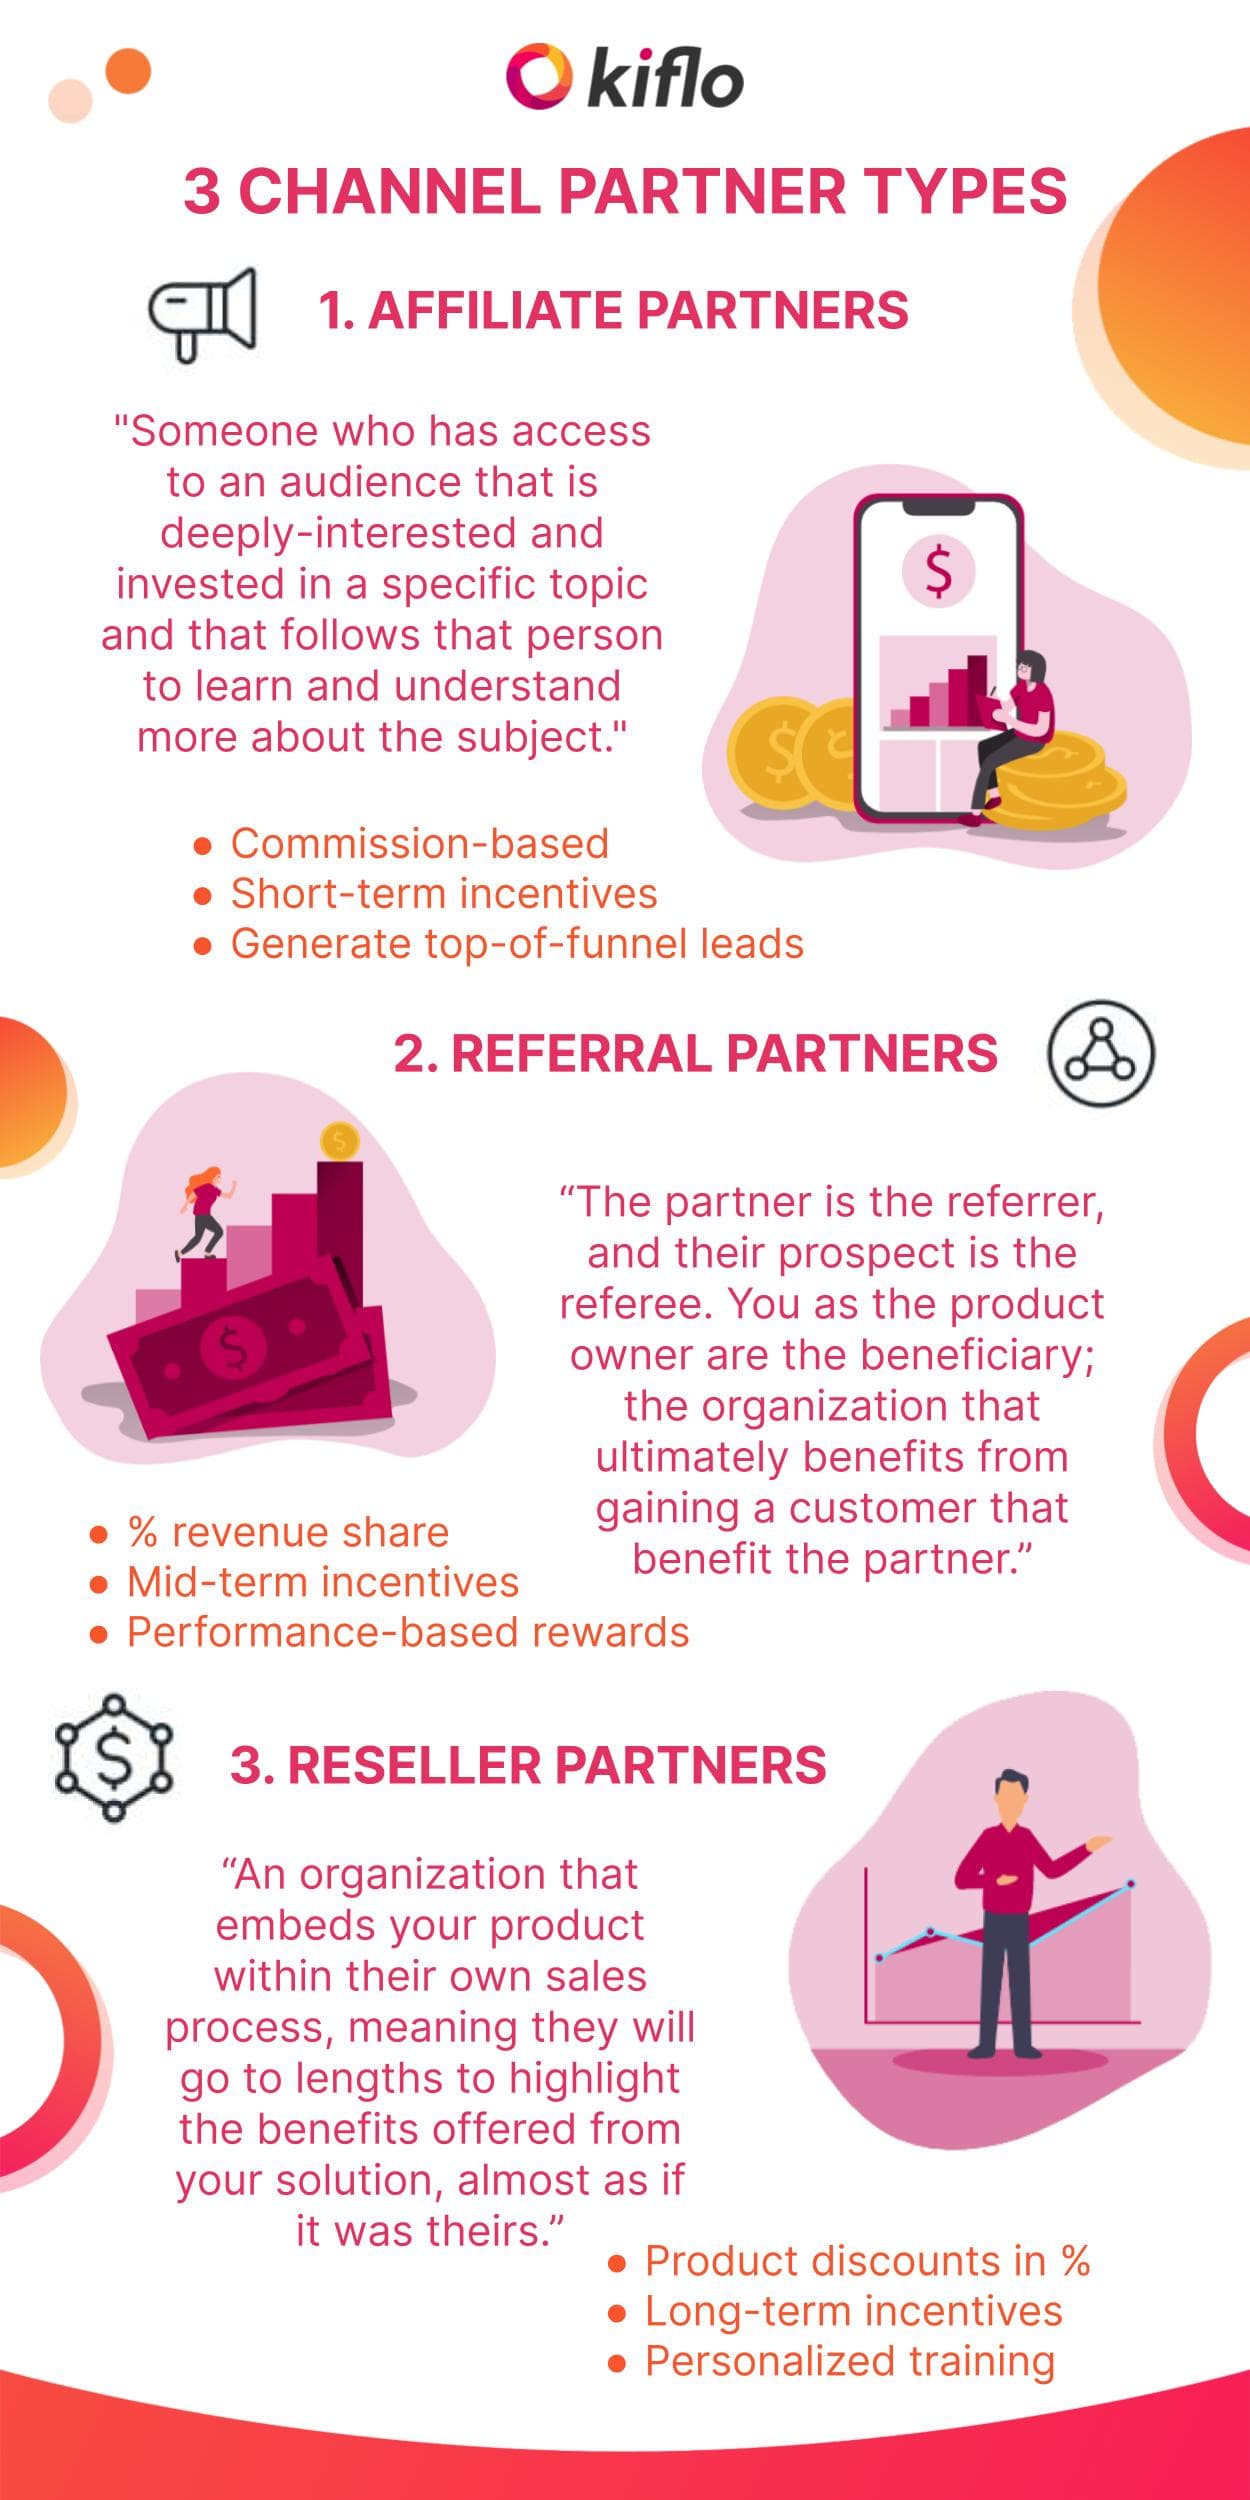 kiflo channel partner types infographic